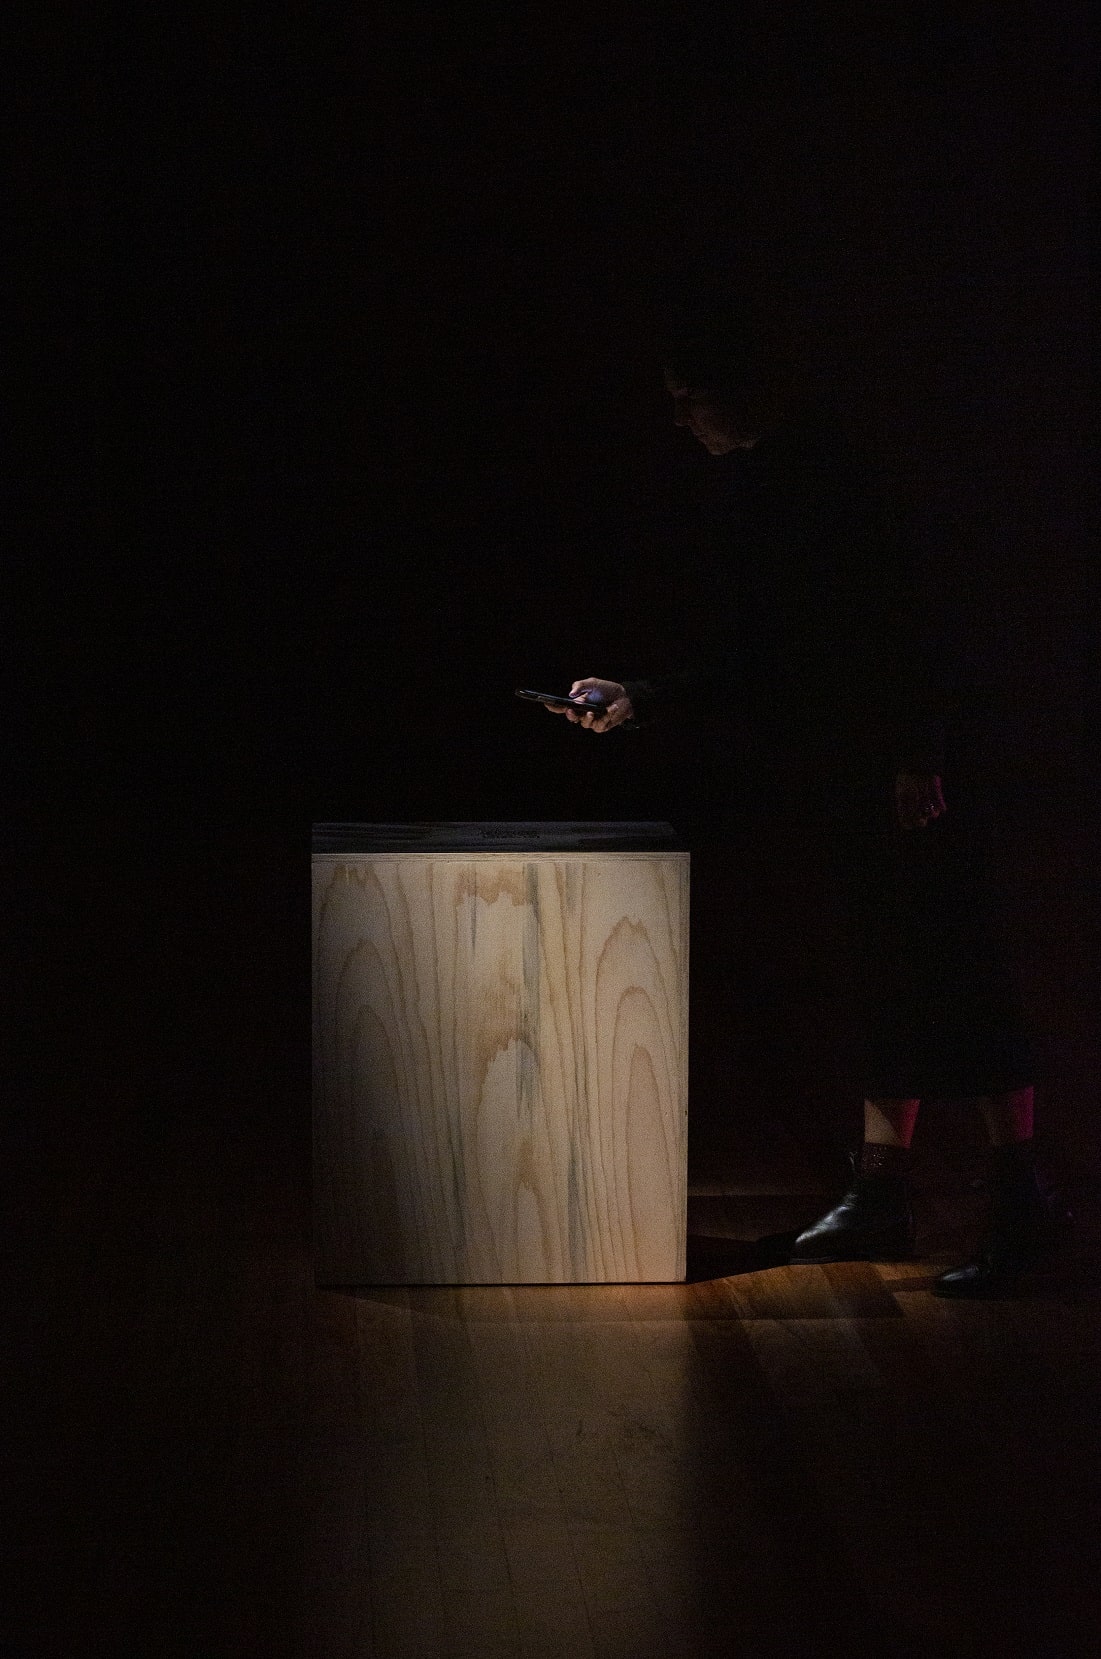 Dark image or a wooden plinth from the side and a person standing, obsured by shadows. They stand over the plinth with their hands and phone looming out of the dark shadows to capture the QR code image on top of the plinth.